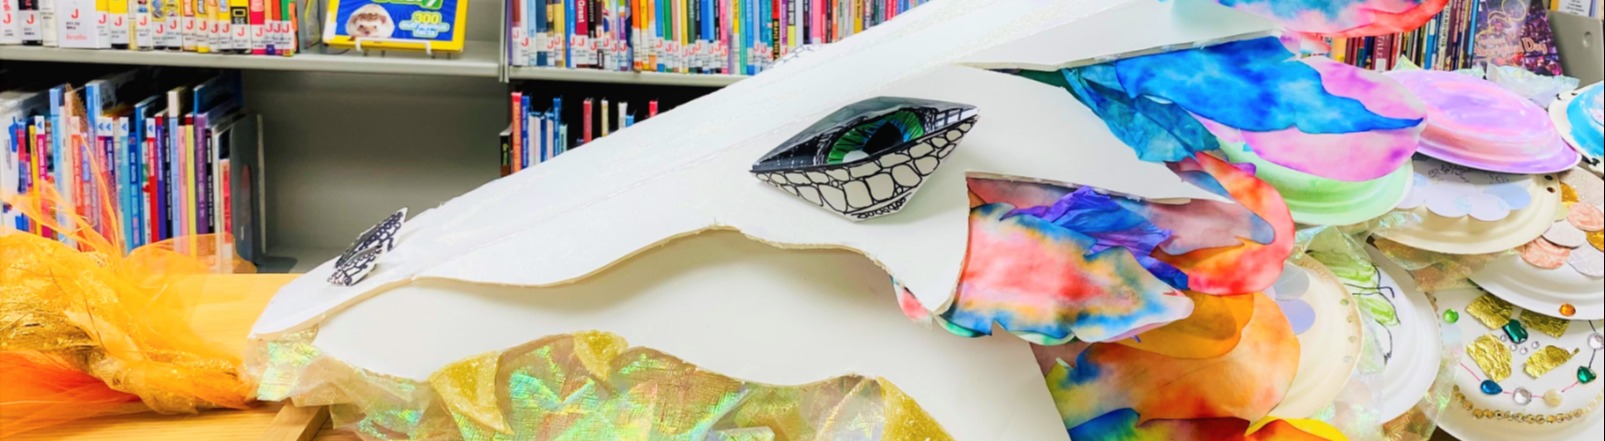 Dragon constructed of decorated paper plates amongst bookshelves.